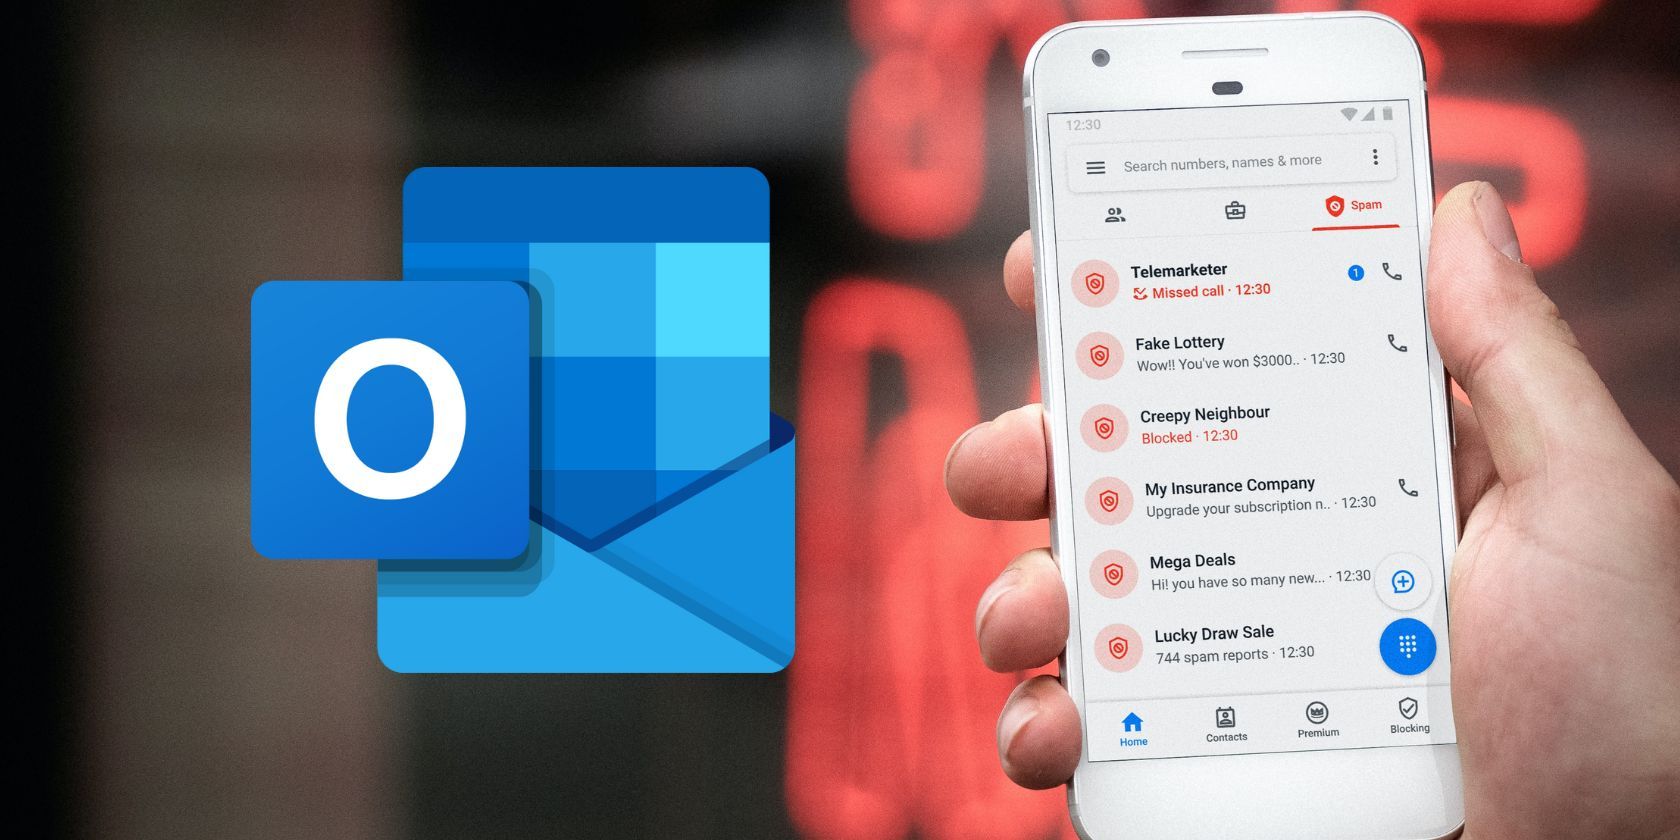 Microsoft Outlook Users Flooded With Spam After Filters Break